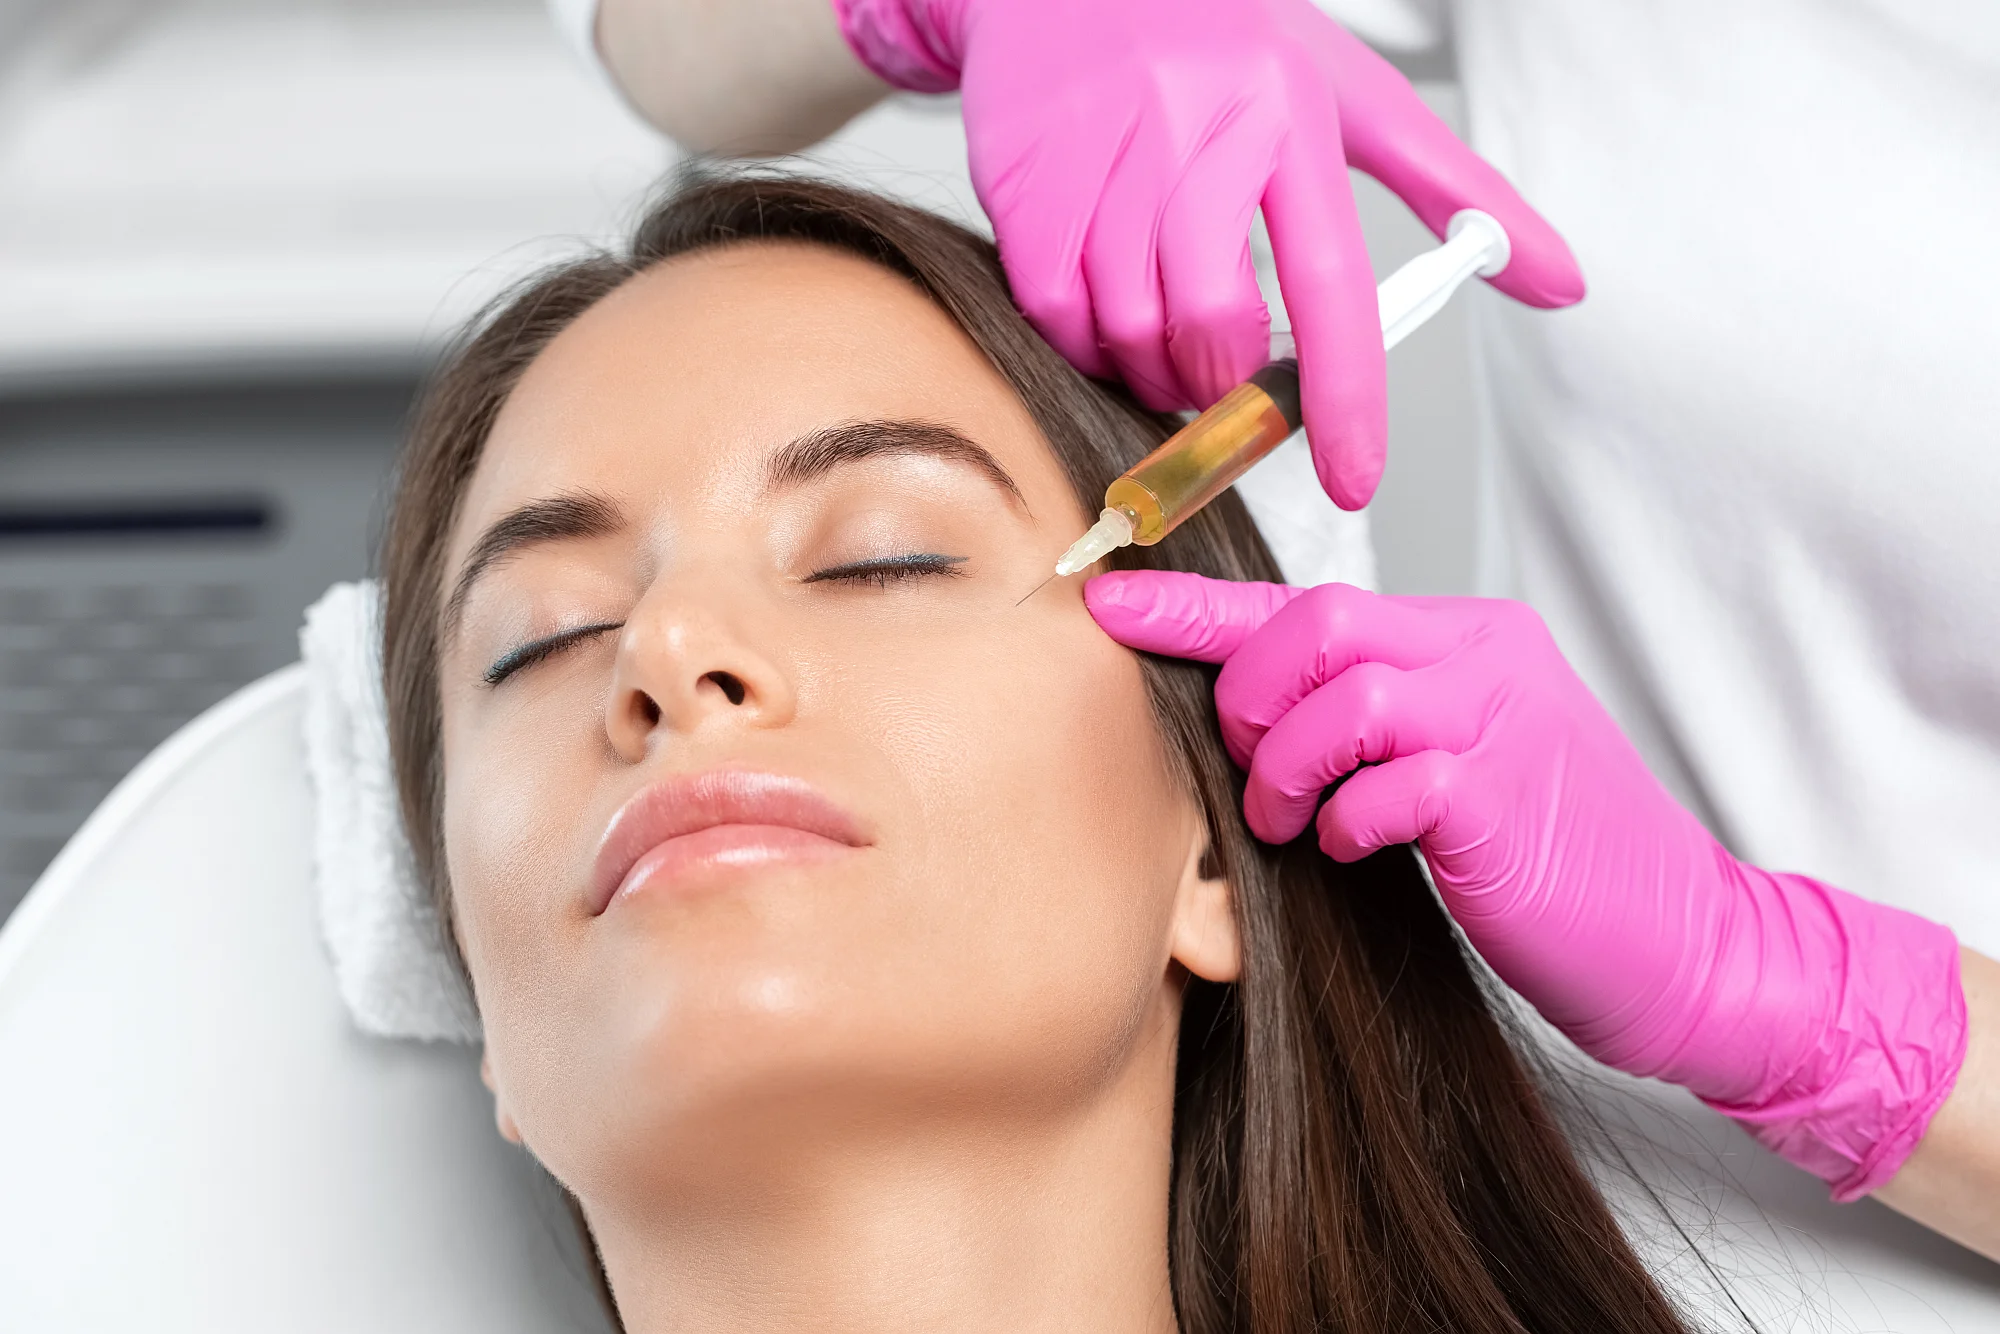 Platelet Rich Plasma in Colleyville, TX | Make You Well Family Practice & Aesthetics